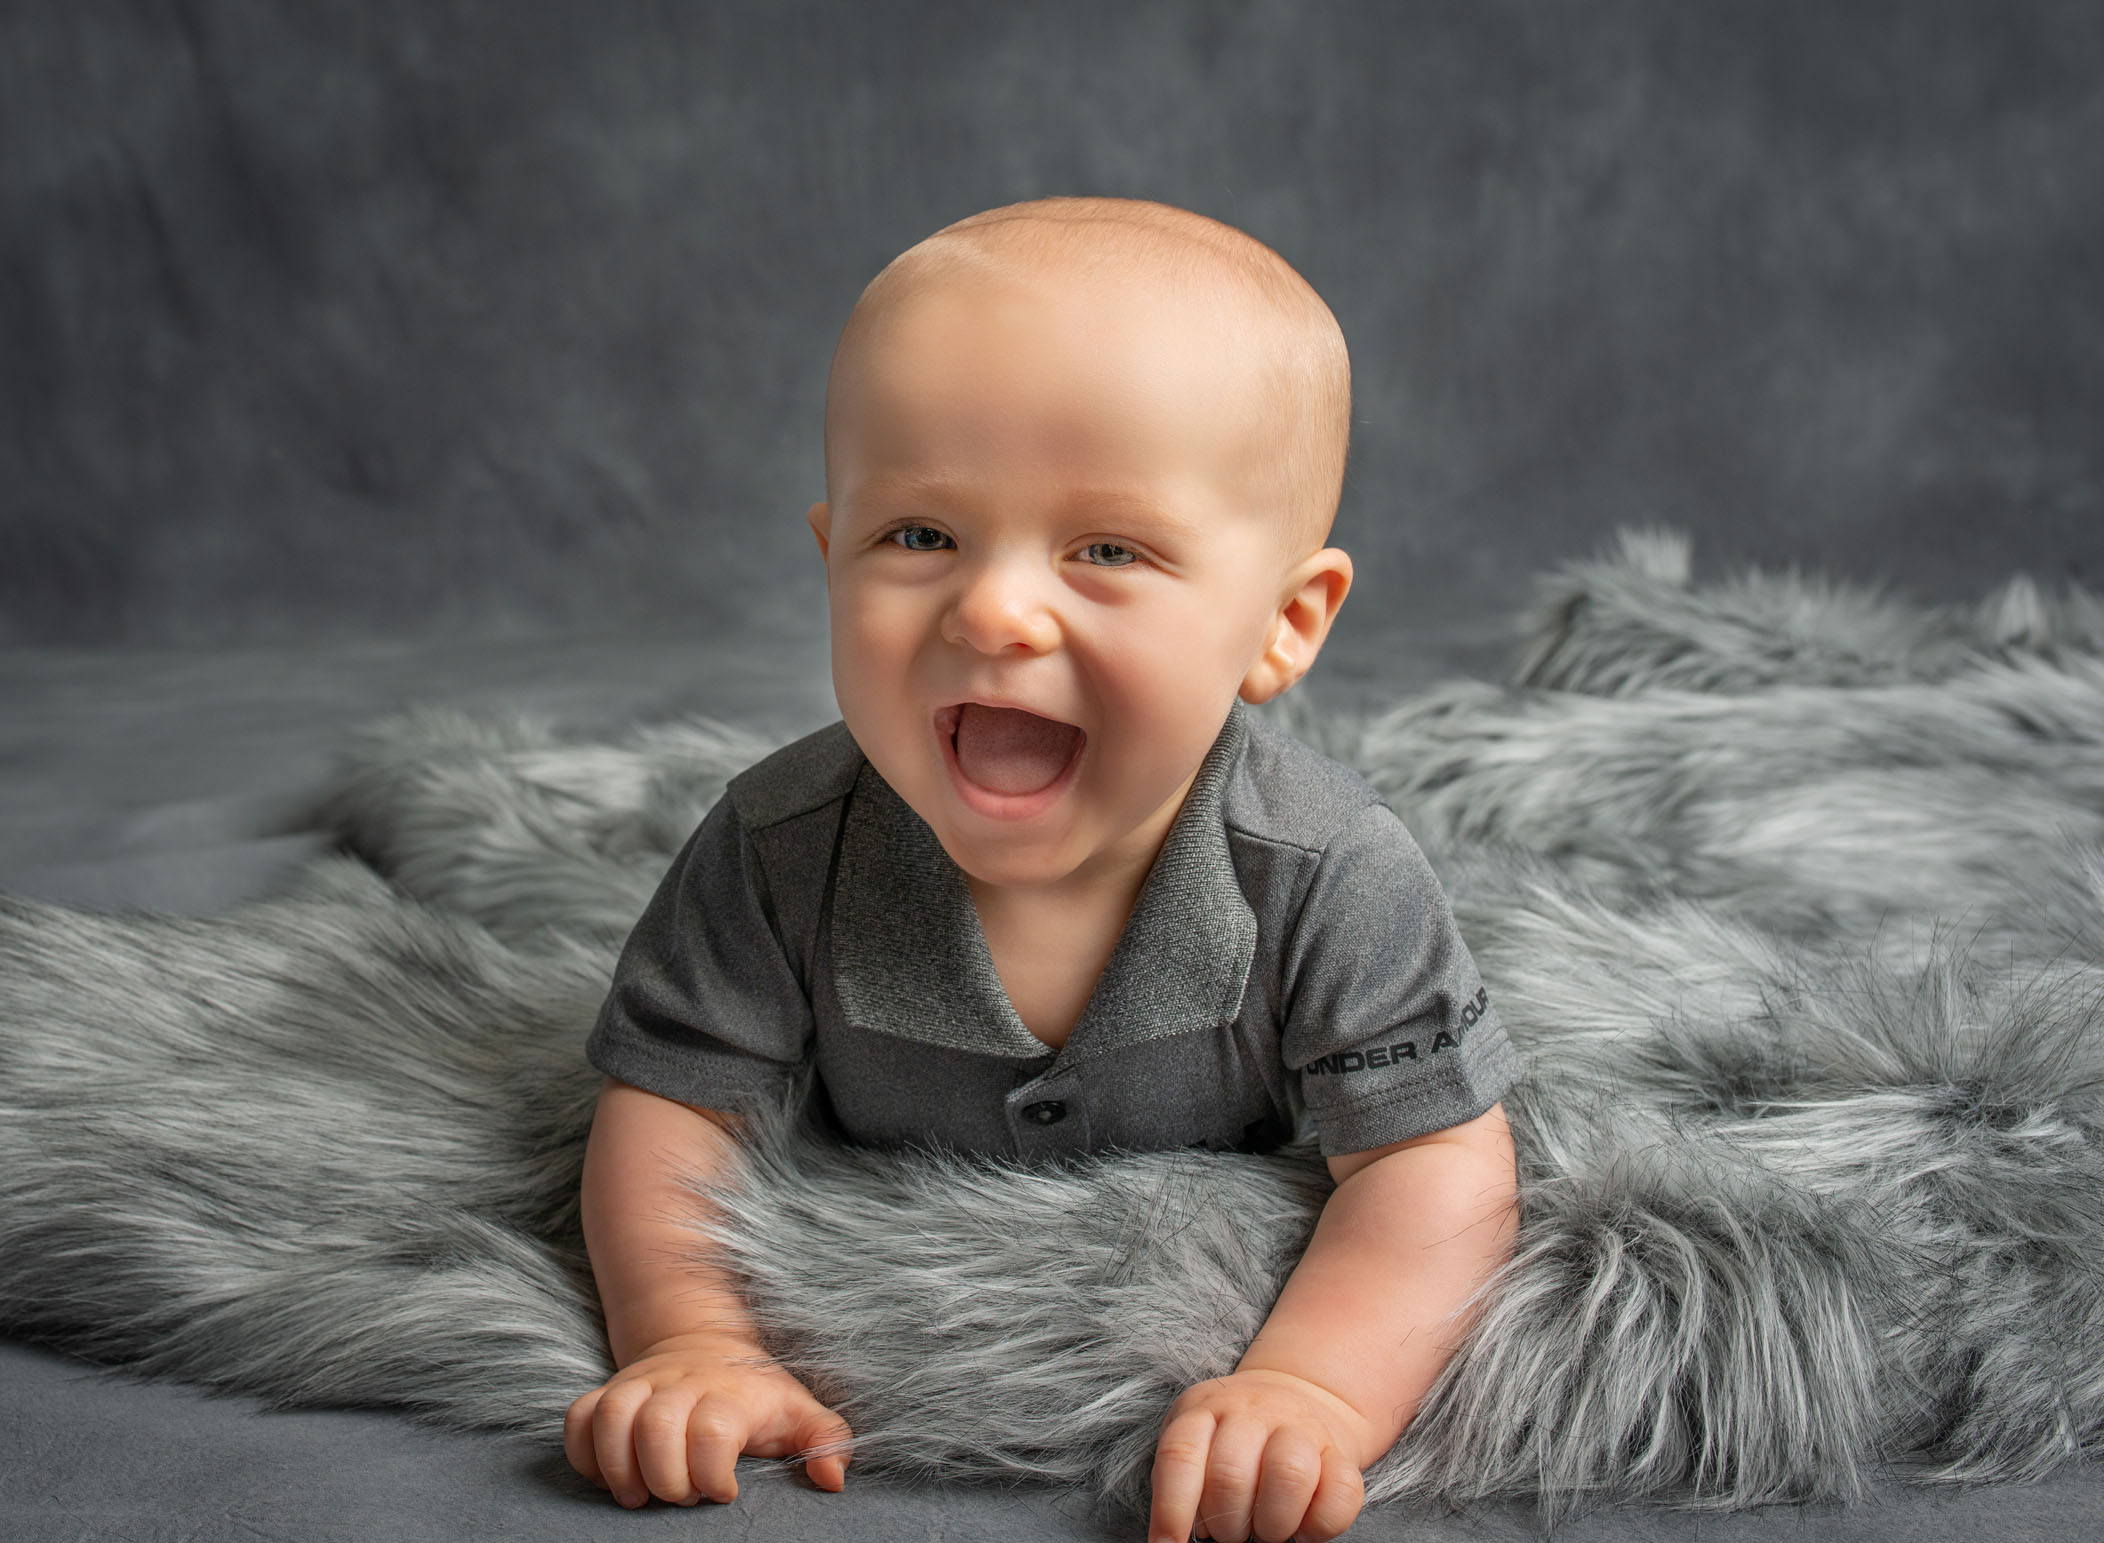 6 month old boy smiling wide on his tummy on grey fur blanket